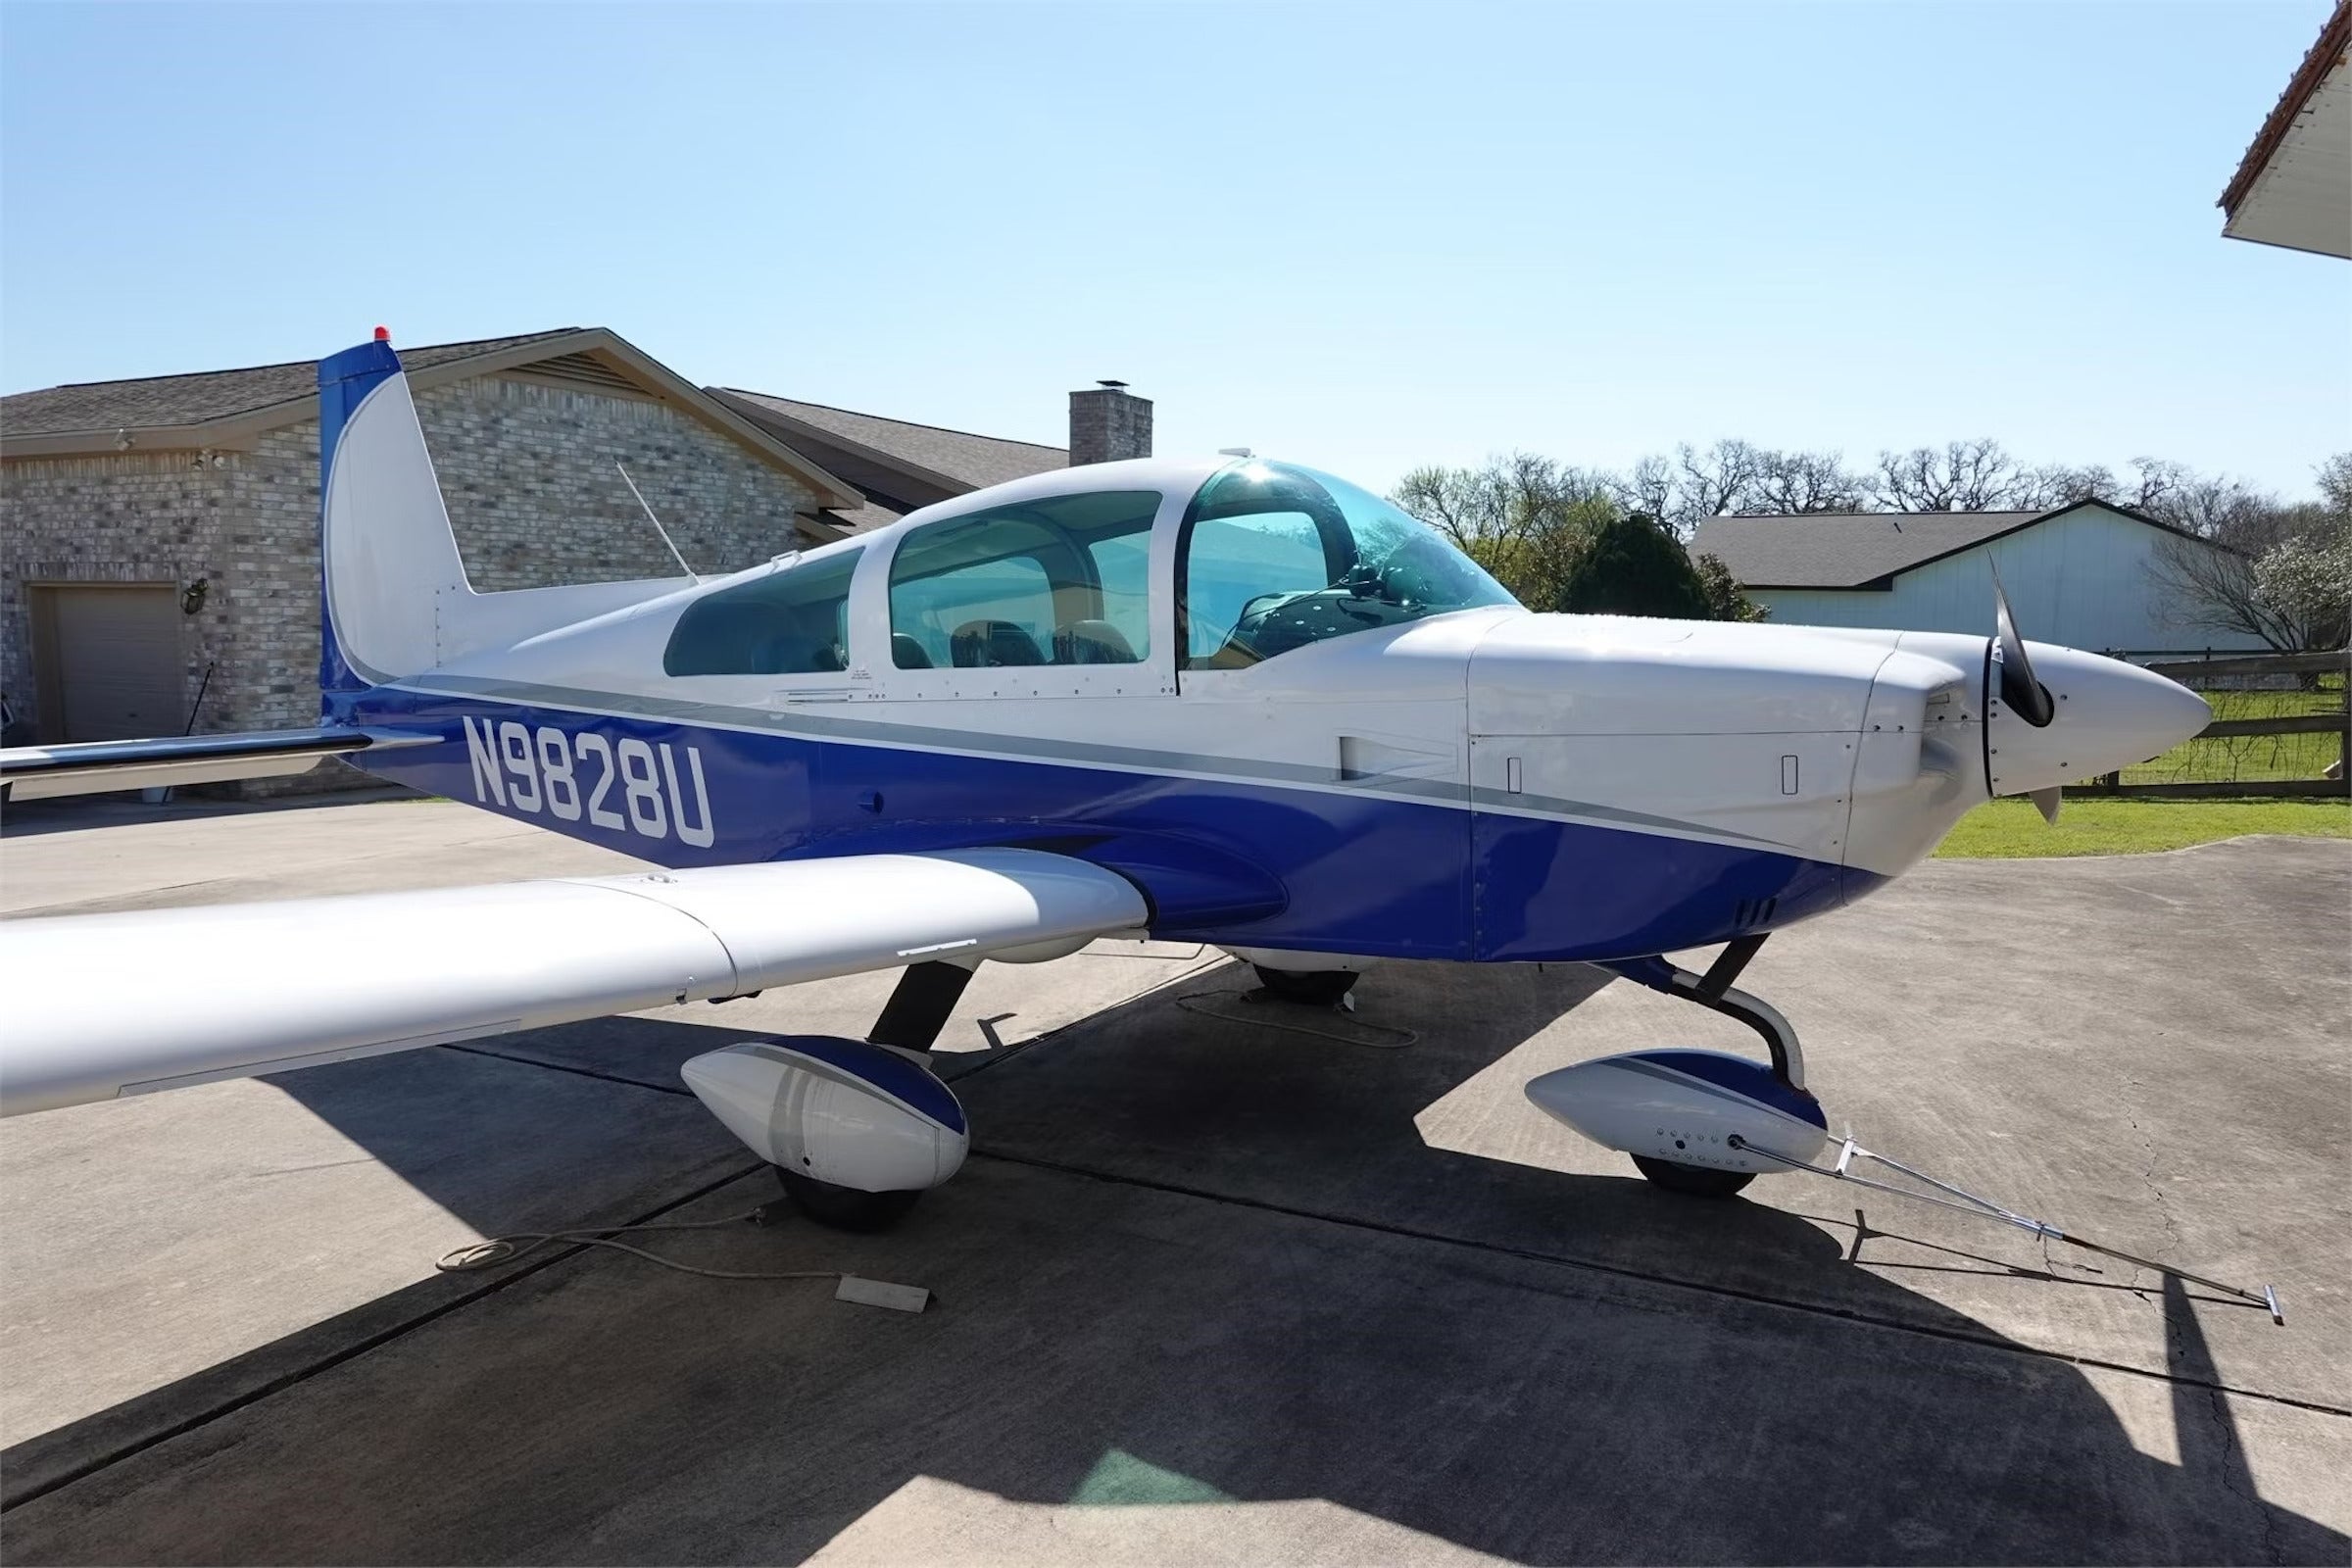 This 1976 Grumman American AA-5A Cheetah Is a Pioneering ‘AircraftForSale’ Top Pick